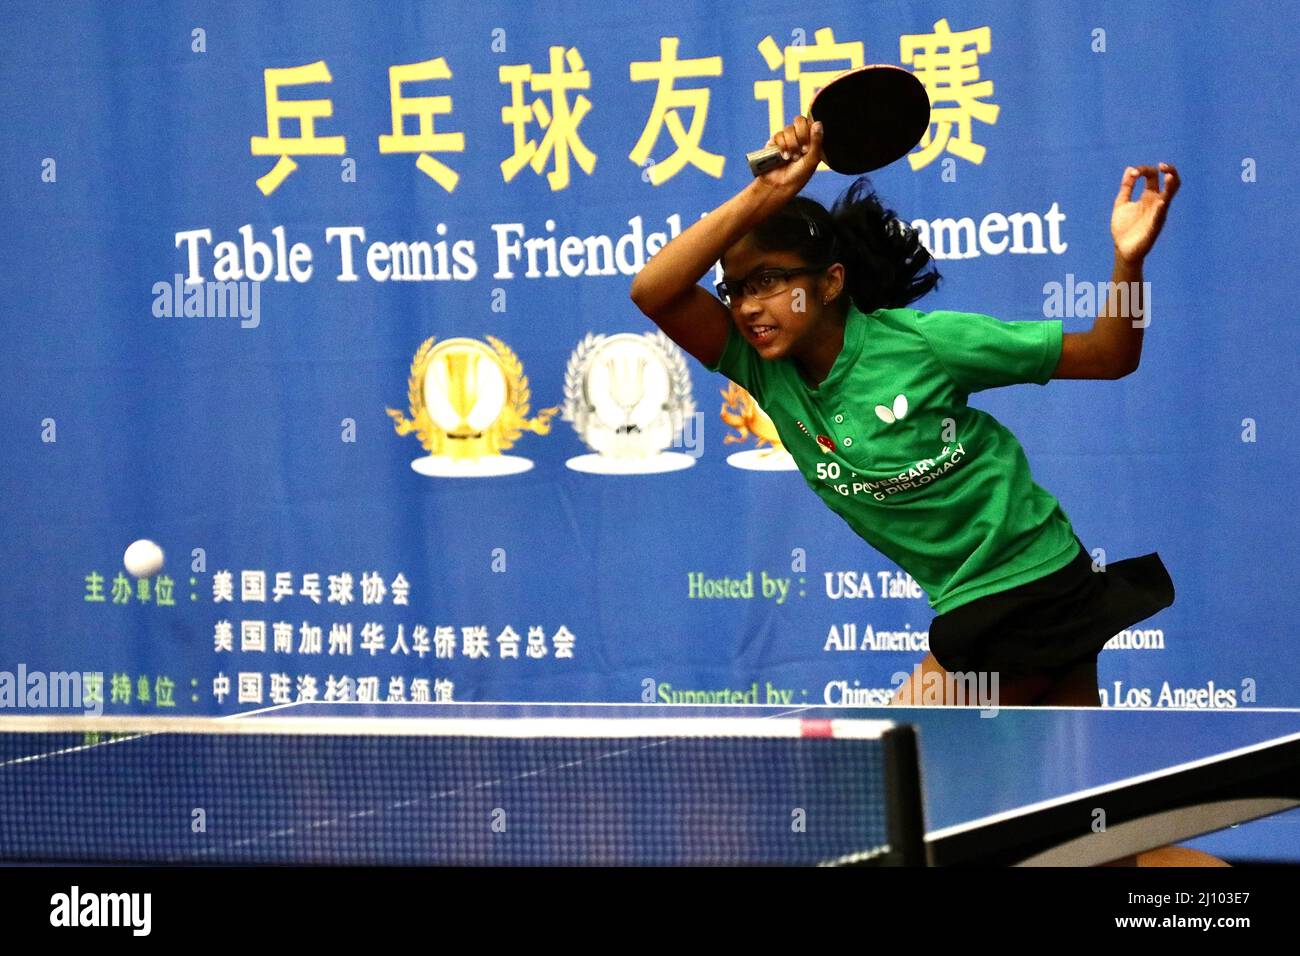 (220321) -- LOS ANGELES, March 21, 2022 (Xinhua) -- A player participates in a Ping-Pong friendship tournament in Los Angeles, the United States, March 20, 2022.  A table tennis friendship match was held here on Sunday to celebrate the 50th anniversary of 'Ping-Pong diplomacy' between China and the United States. The commemorative event was jointly organized by the USA Table Tennis (USATT) and the All American Chinese Association. (Xinhua) Stock Photo